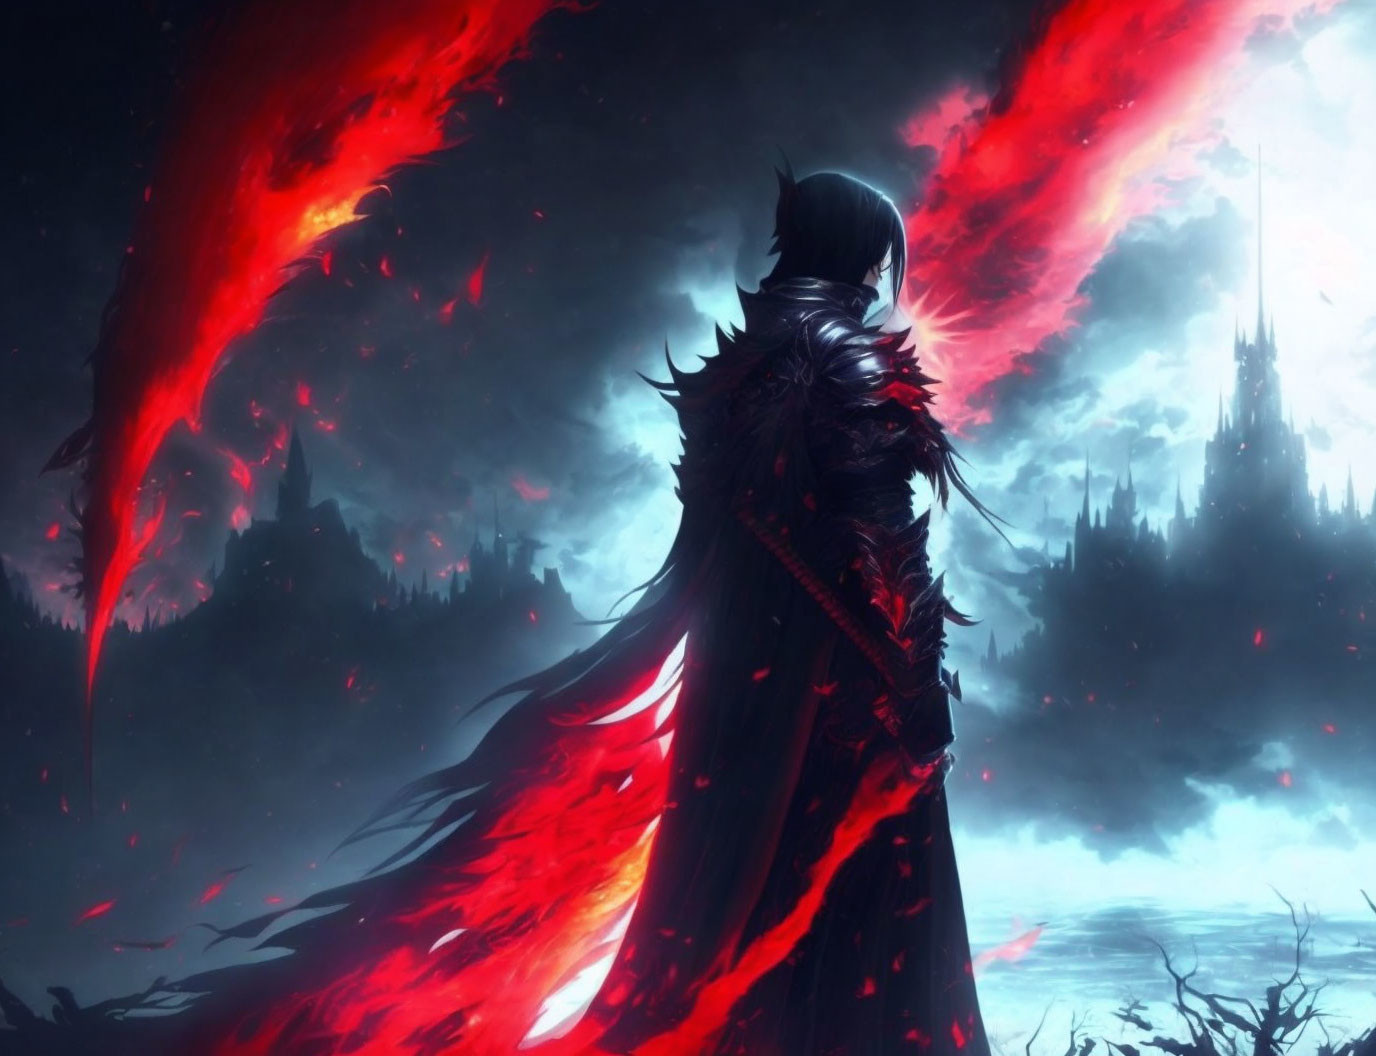 Mysterious cloaked figure in front of fiery landscape with dark castle silhouette